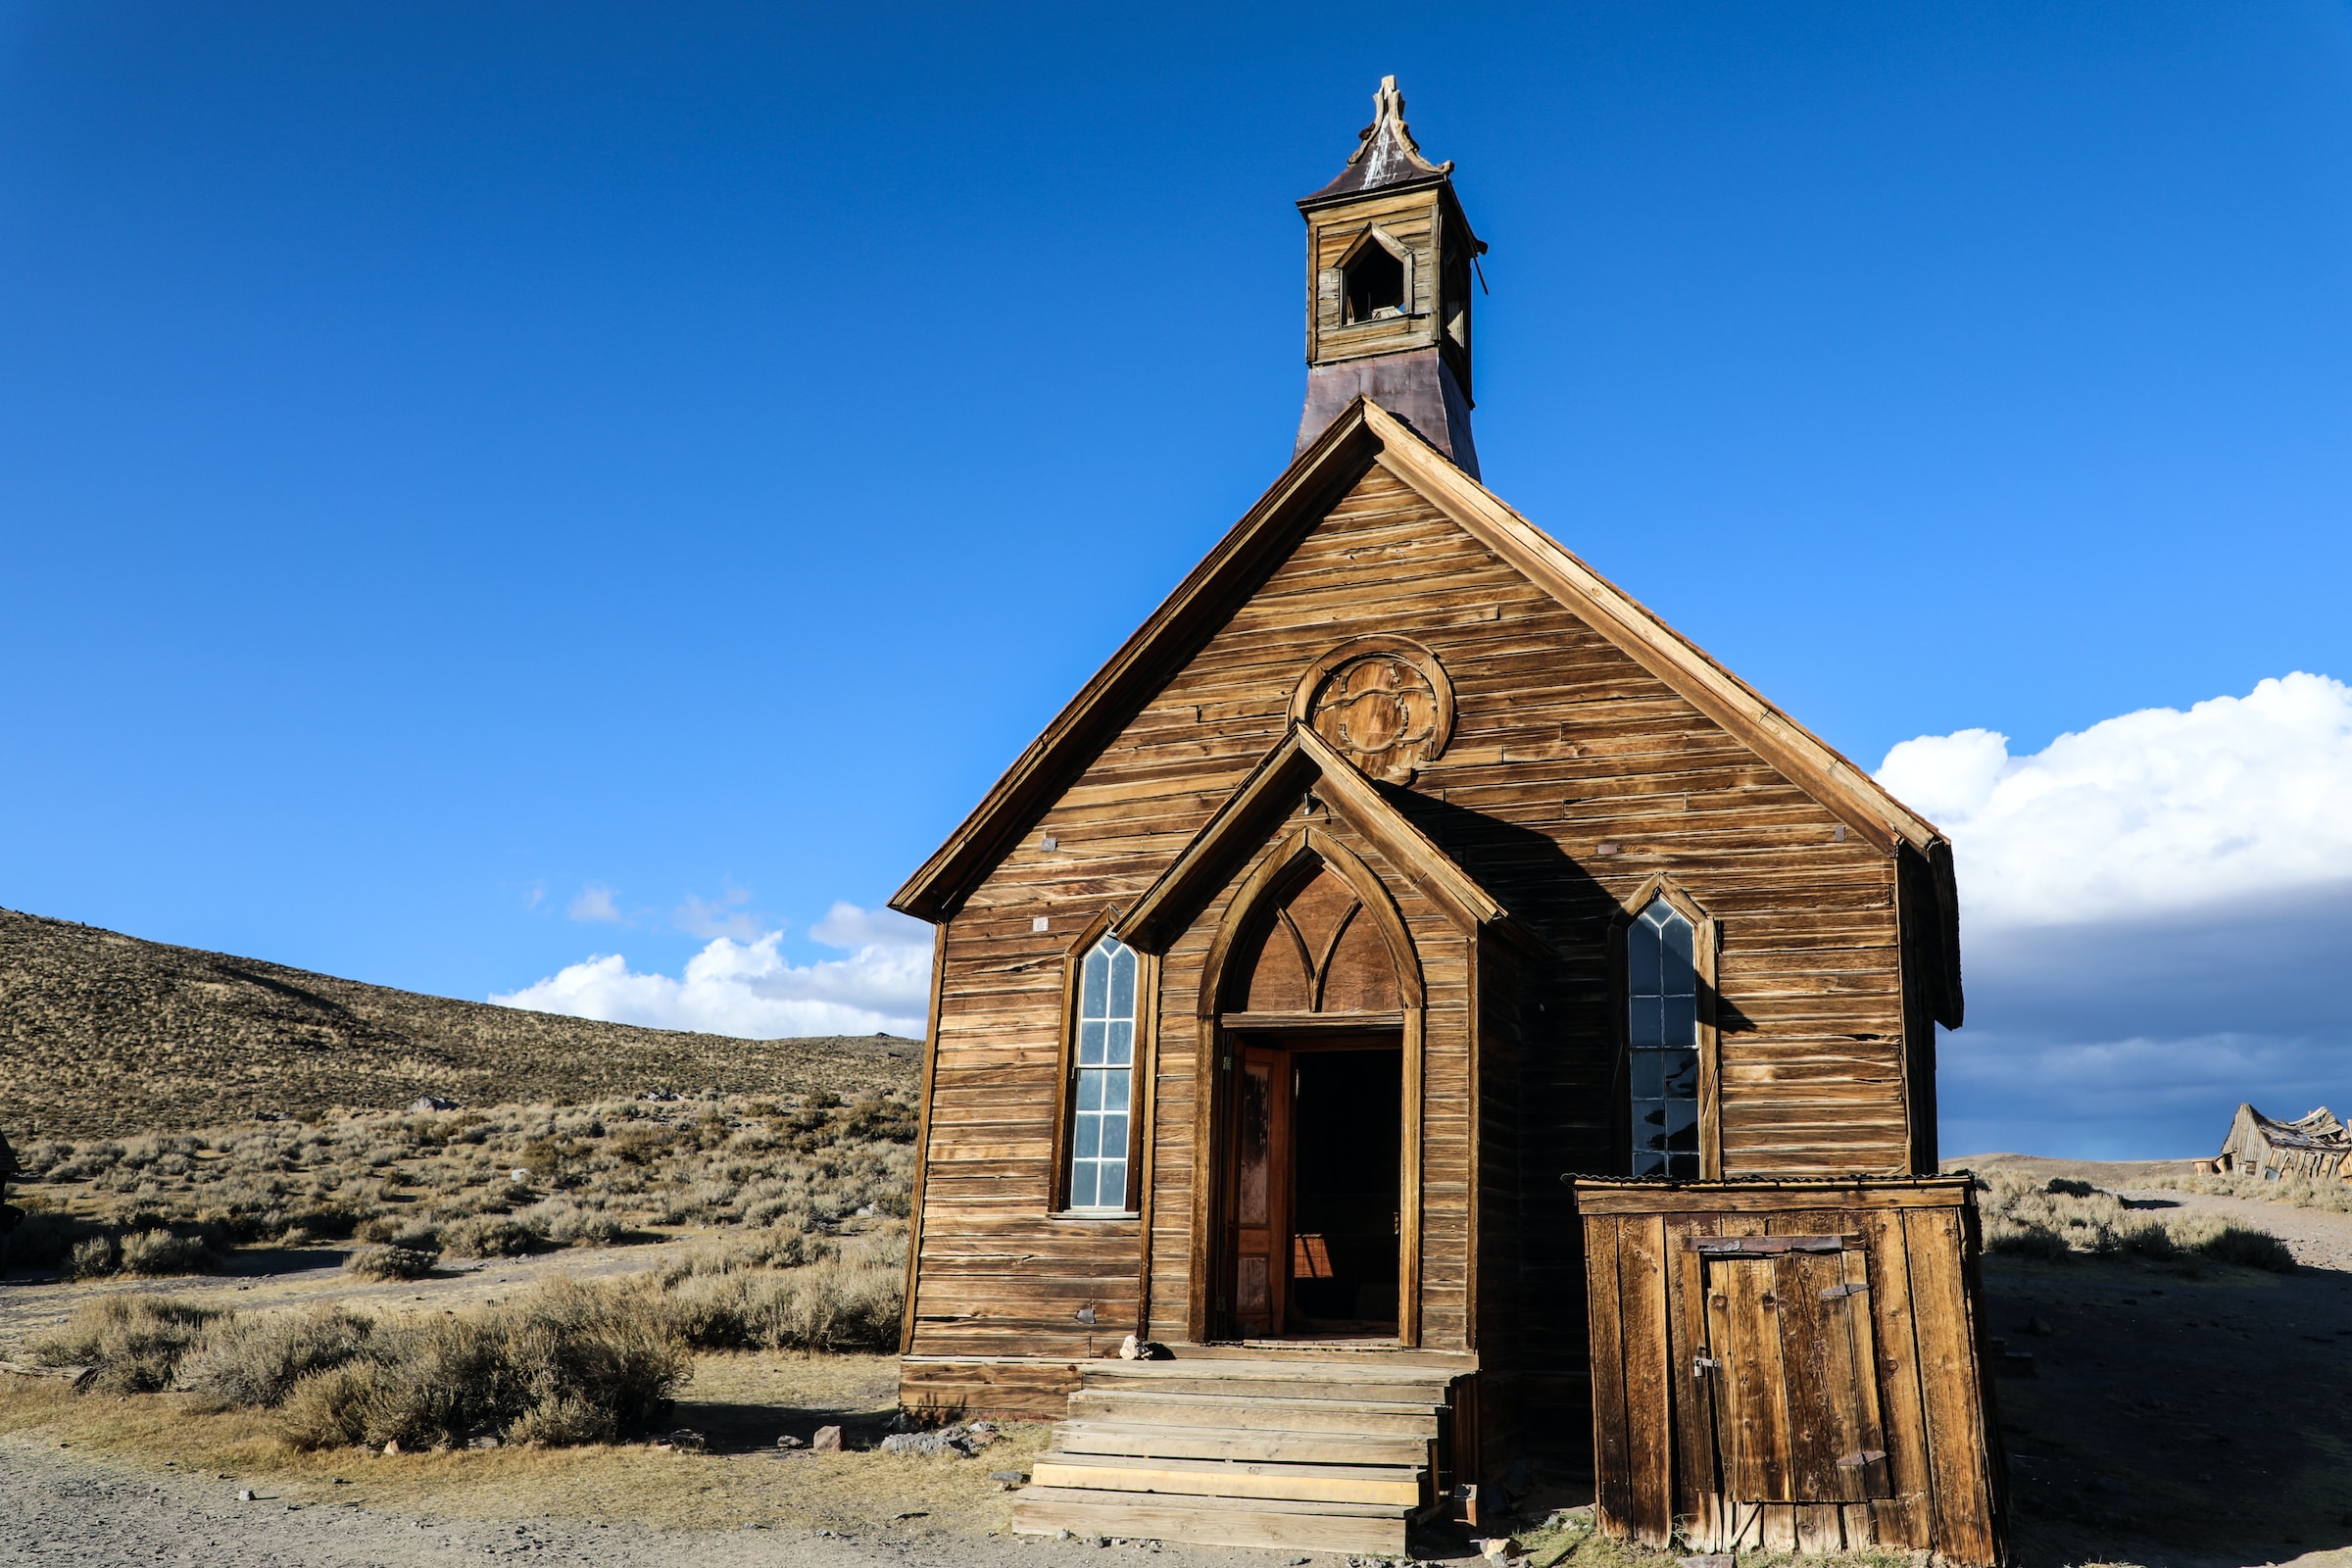 Abandoned church at Bodie California